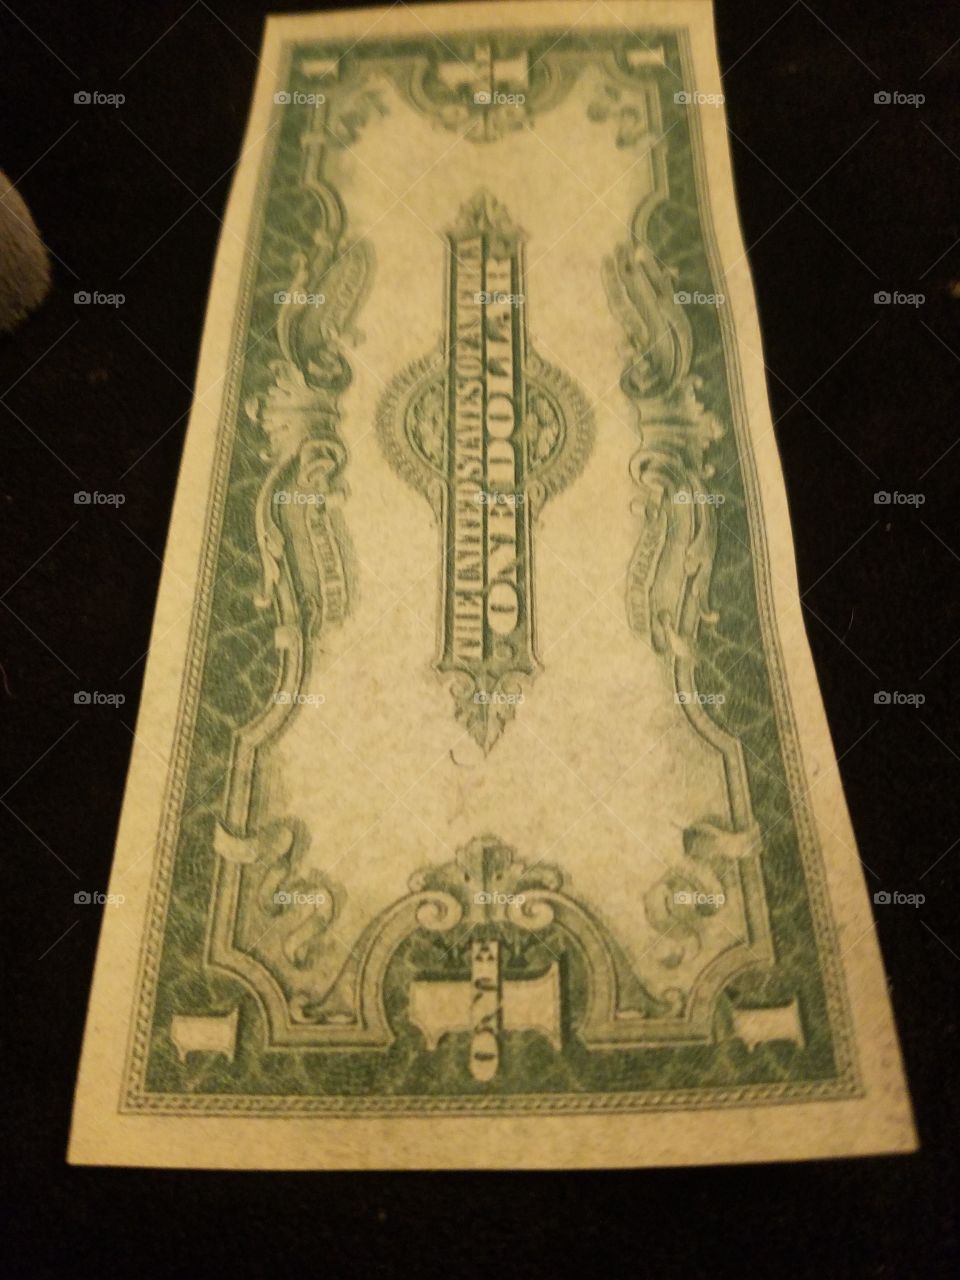 The single most common large size piece of United States currency is the 1923 $1 silver certificate.  These were issued by the millions.  reverse side